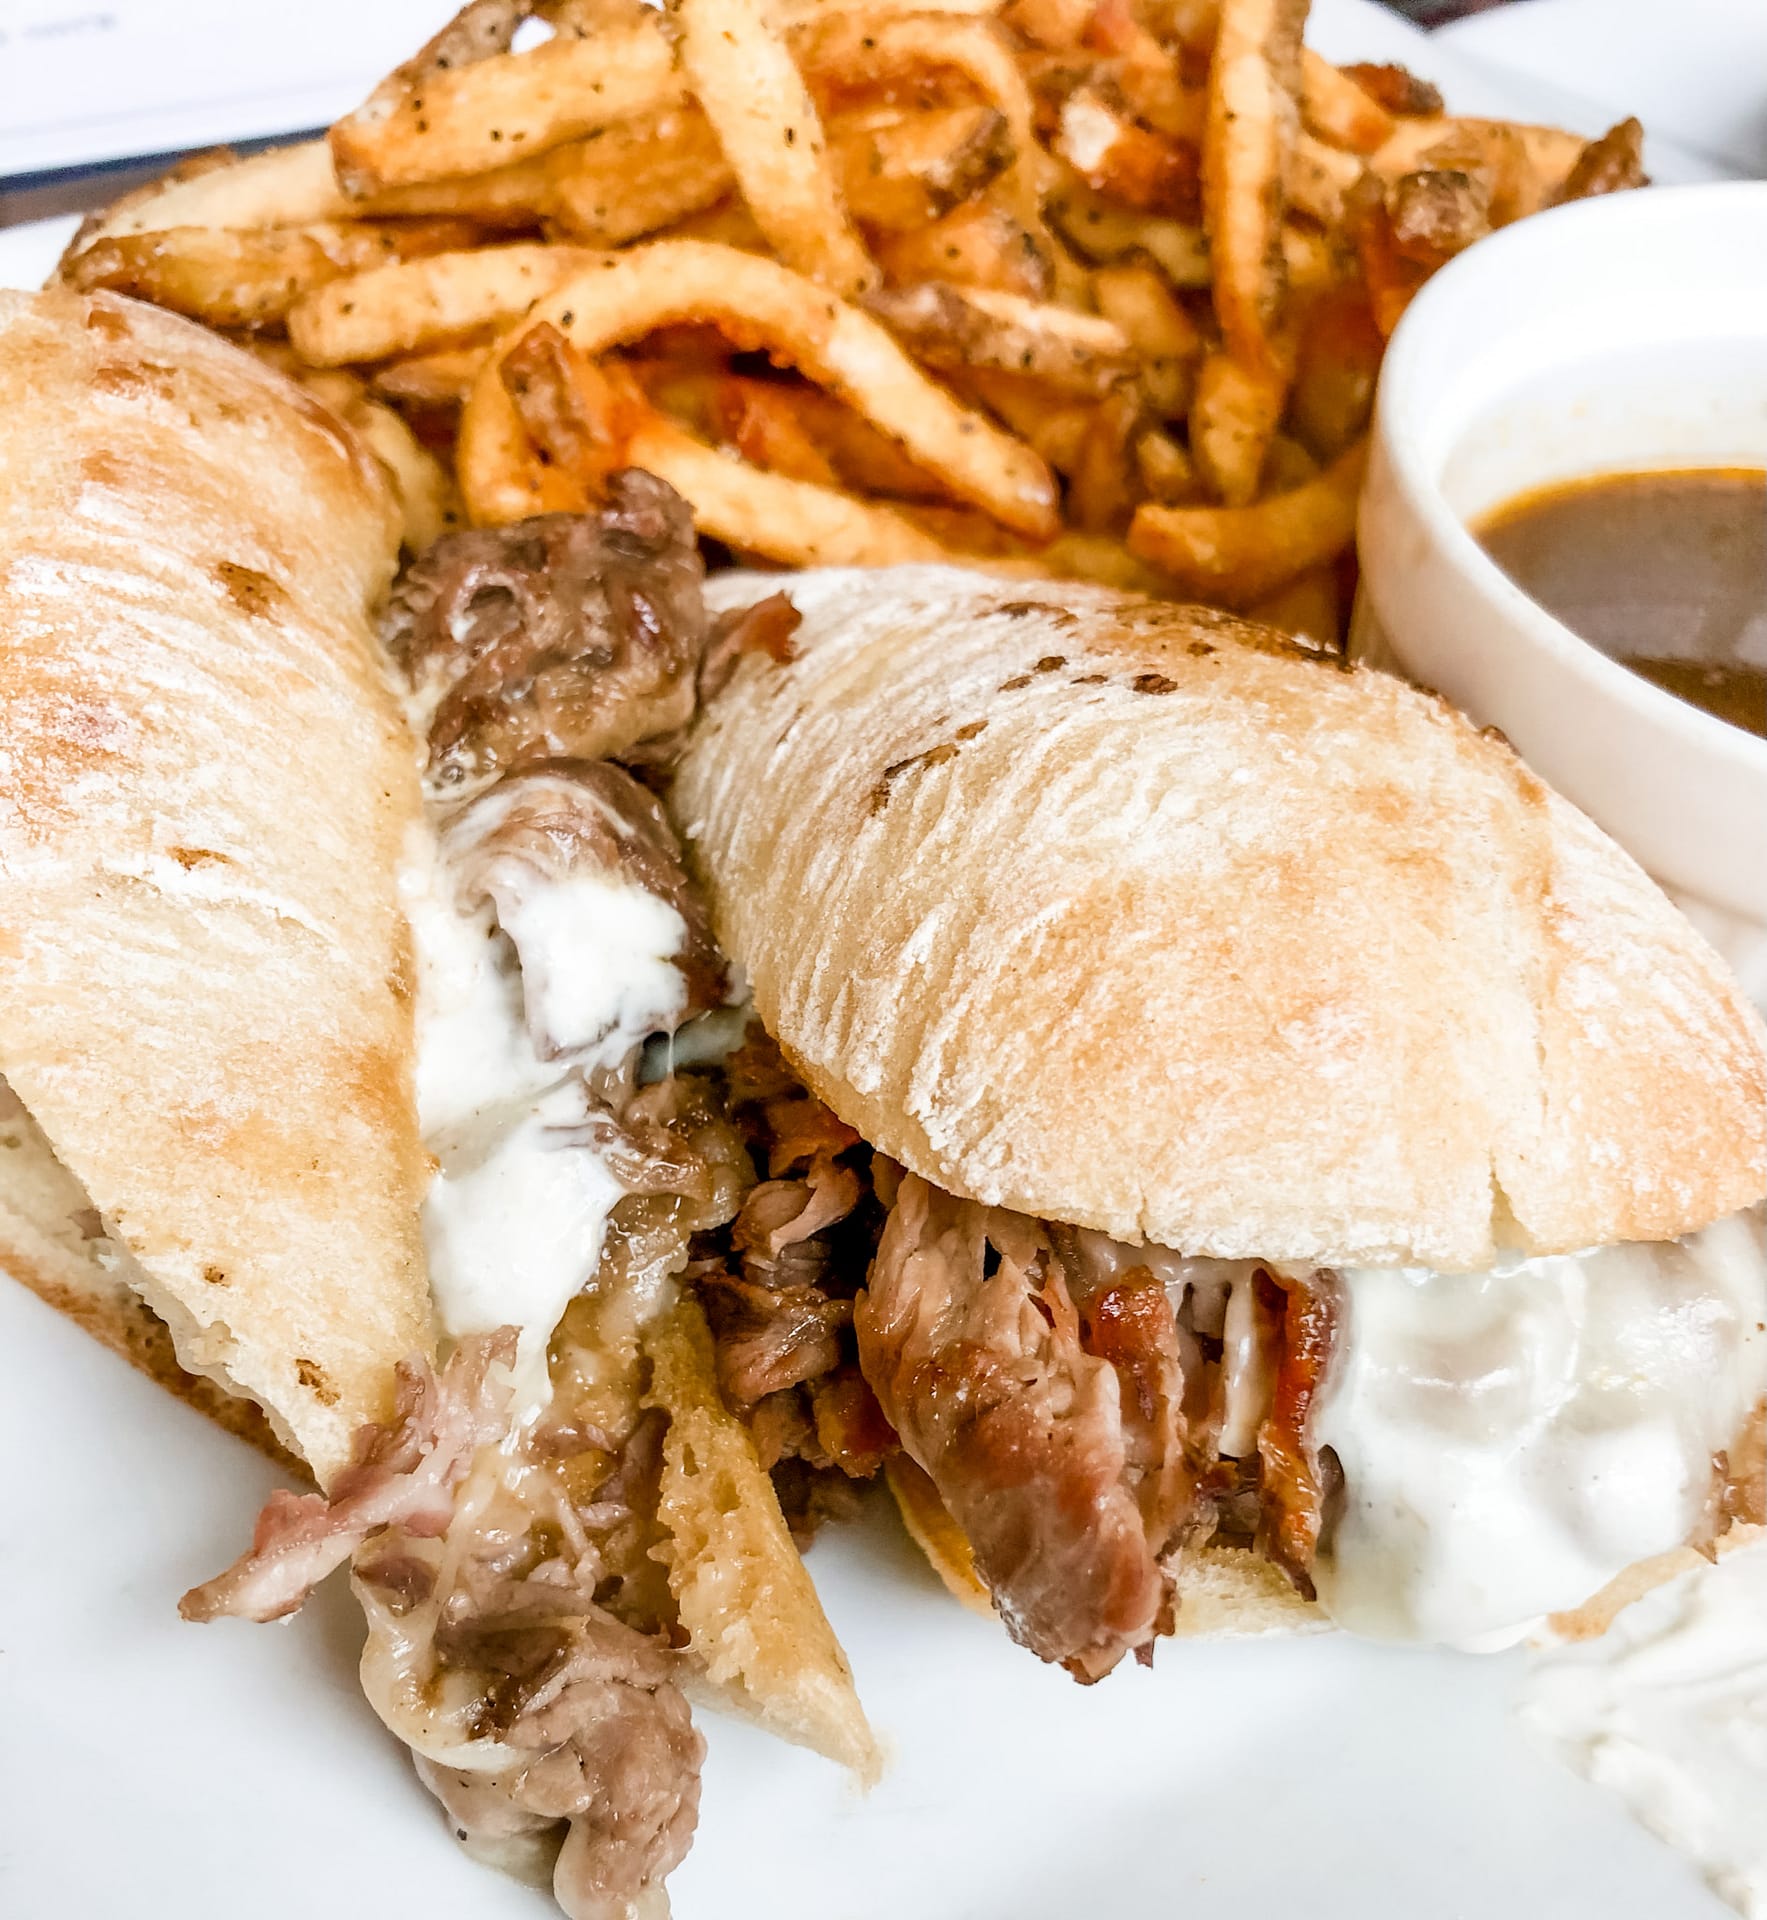 Plate with steak sandwich and french fries with sauce on the side